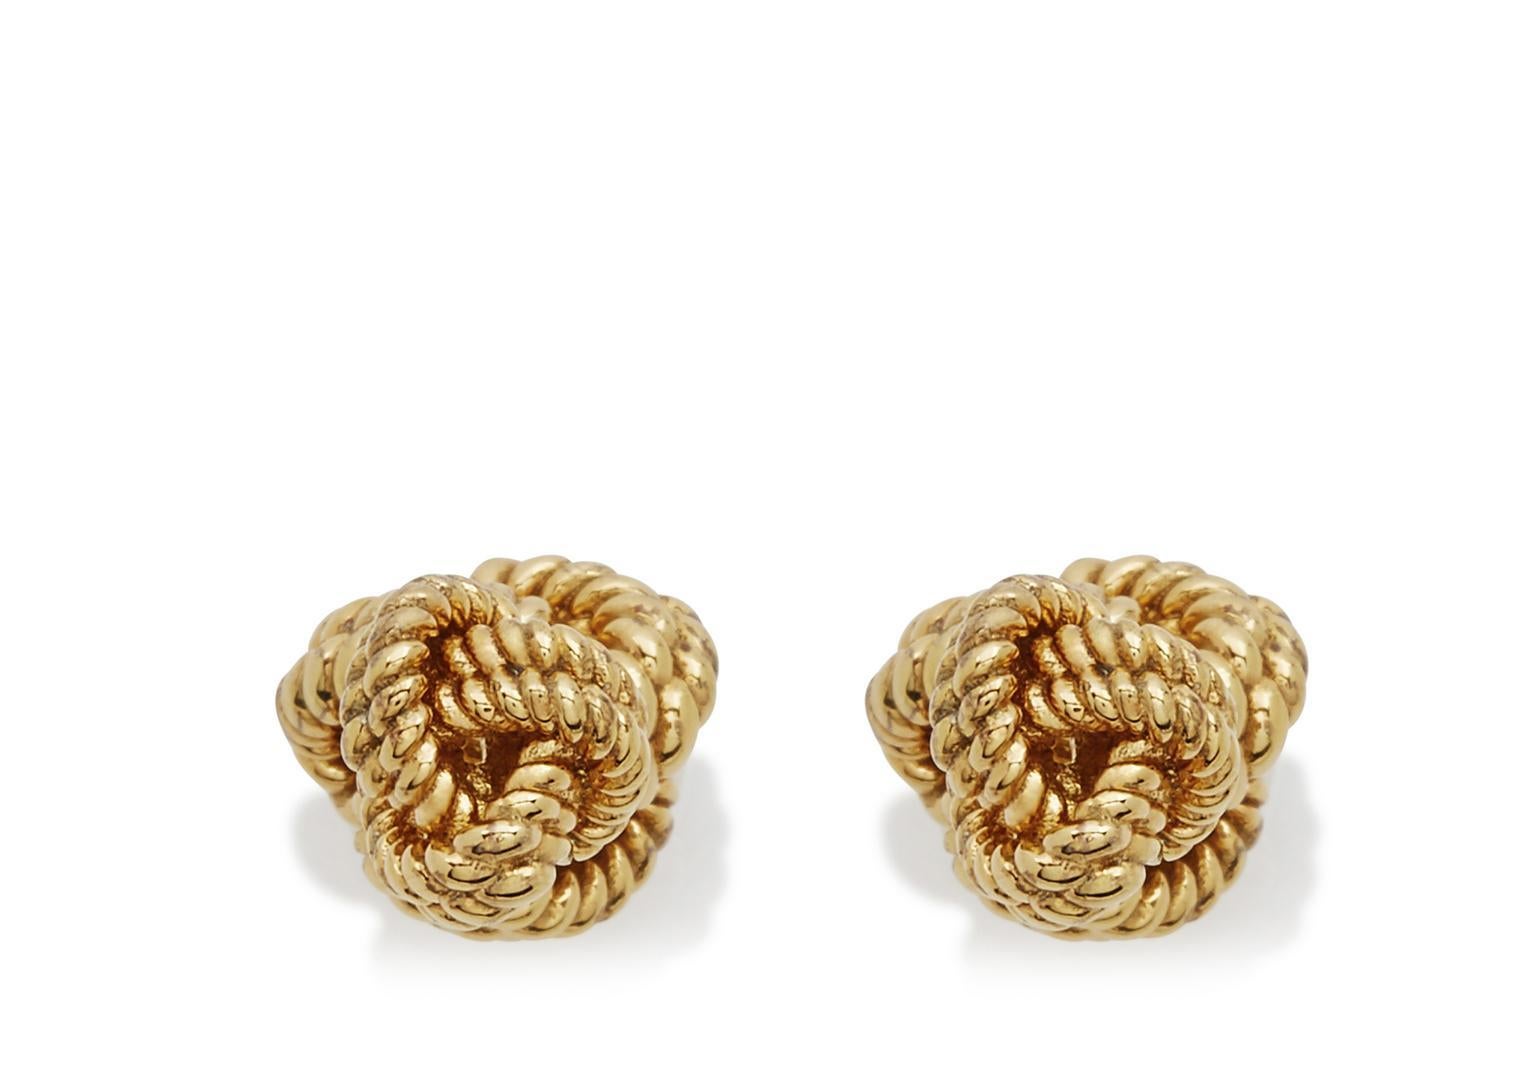 Its Vintage 
Classic cufflinks in high-polished 14 karat yellow gold,
Men's 14K Yellow Gold 16 mm Knot Cuff Links, 
Size: One Size
Take your image and style up a notch with these 14k yellow gold cuff links featuring a rope knot design. 
measurements